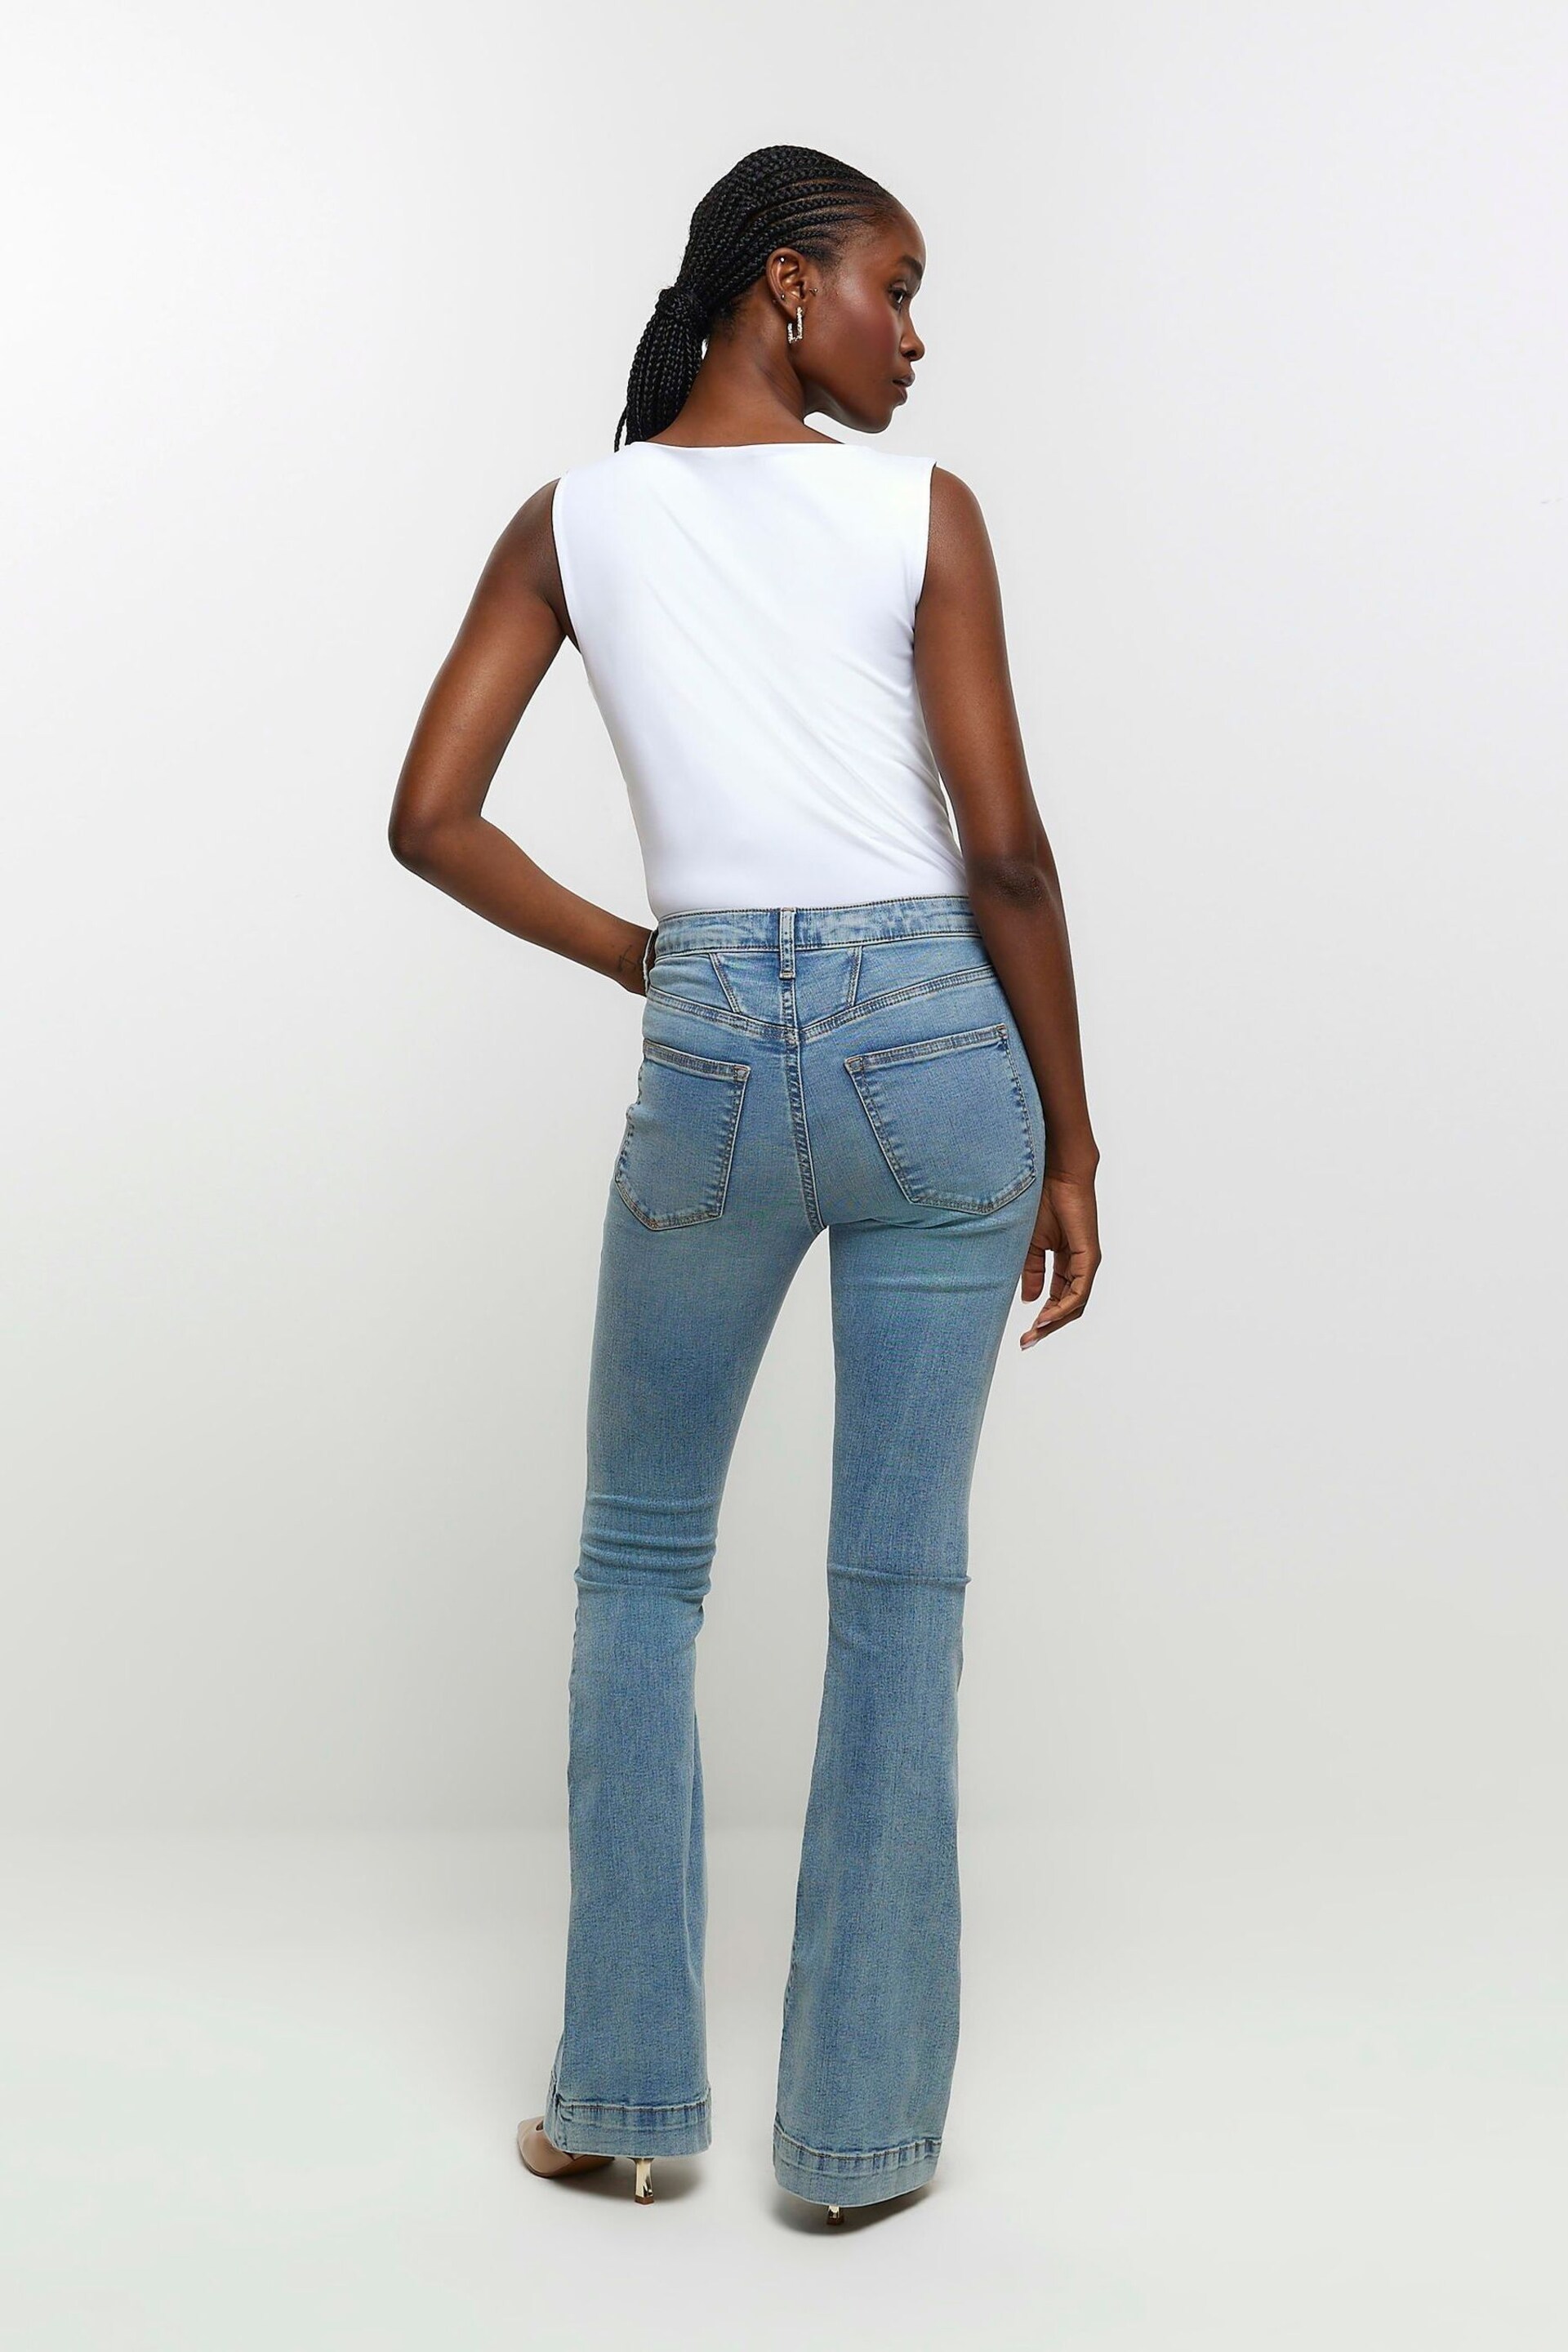 River Island Blue High Rise Tummy Hold Flare Stretch Jeans - Image 2 of 5